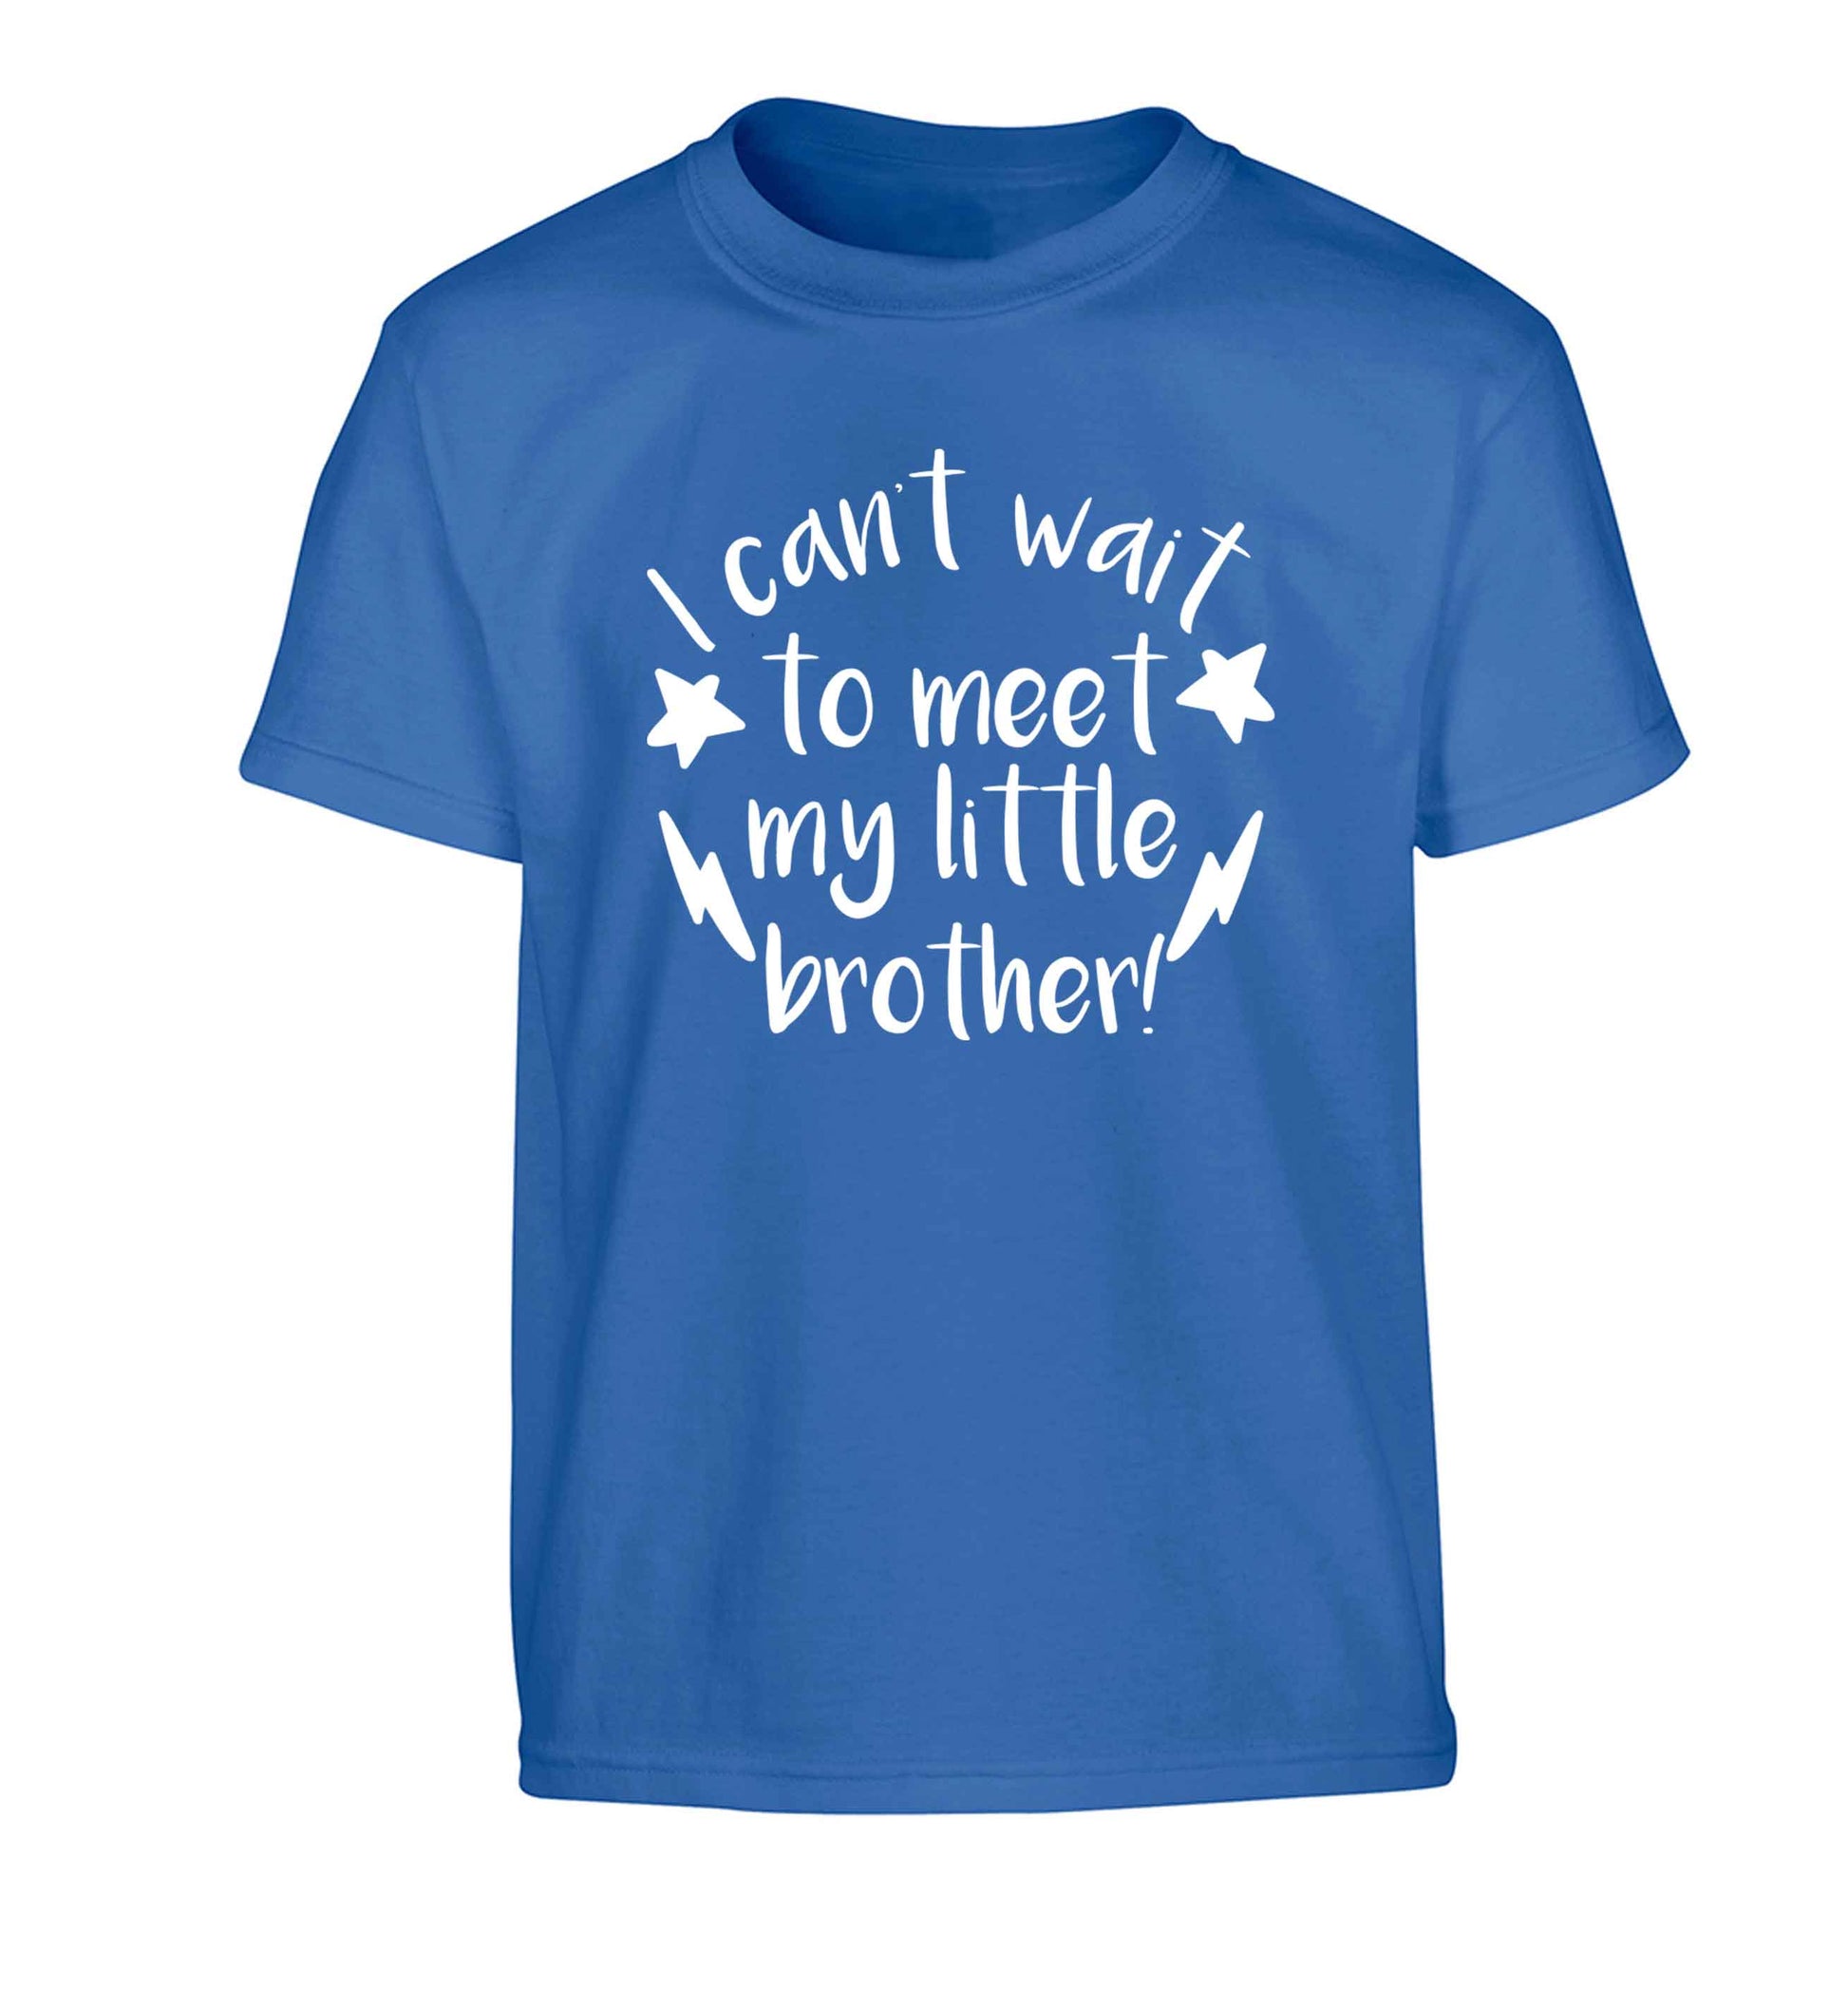 I can't wait to meet my sister! Children's blue Tshirt 12-13 Years